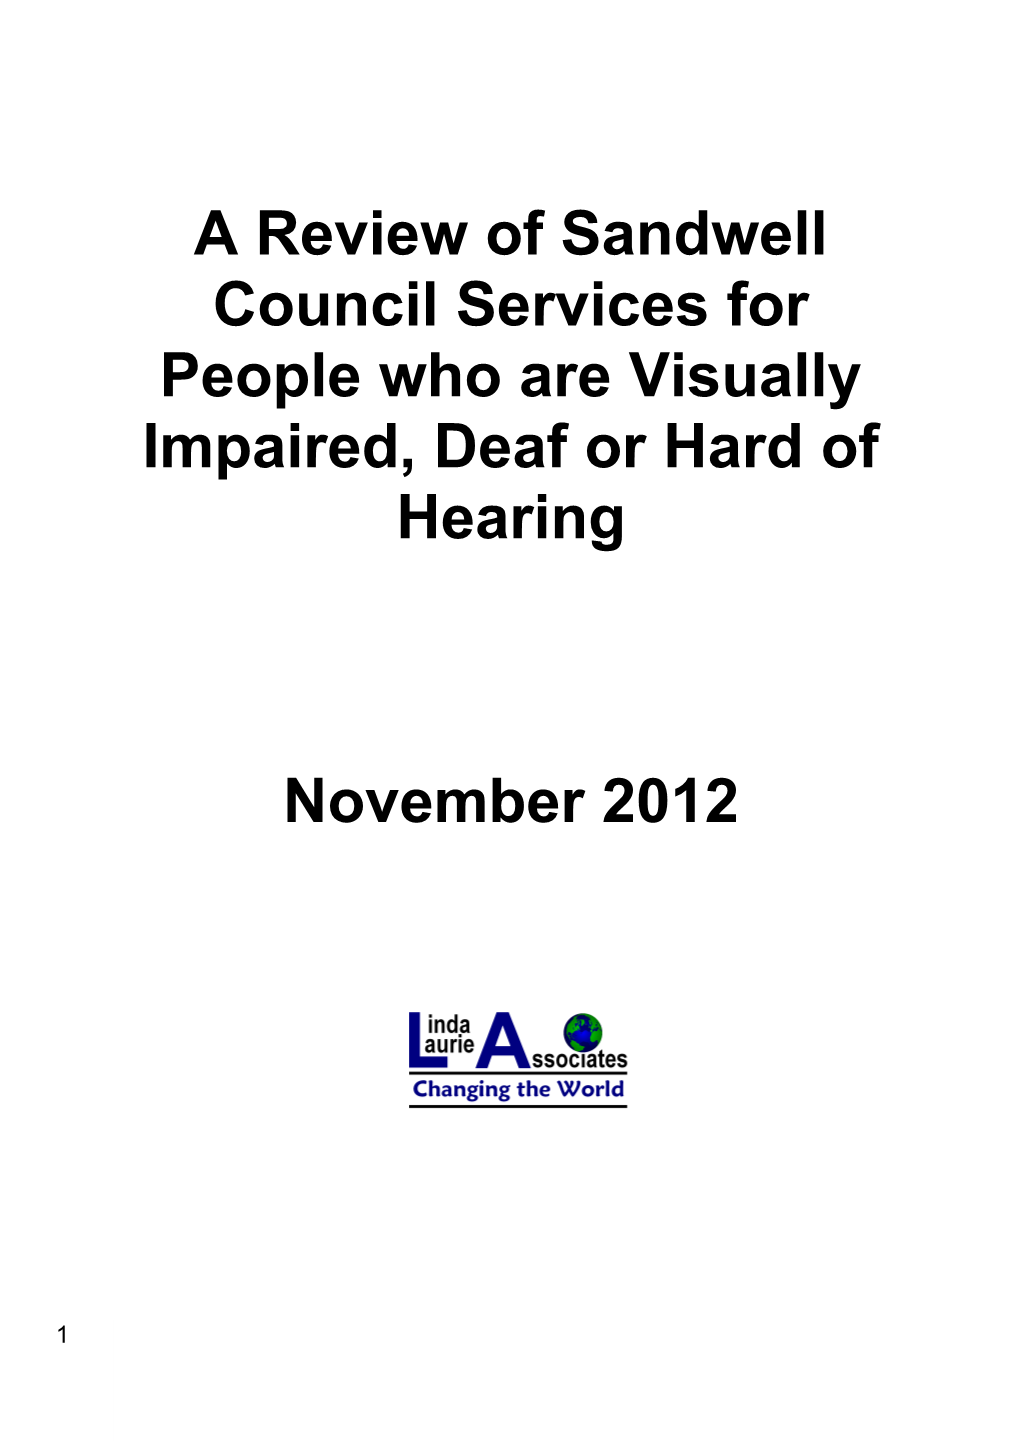 A Review of Sandwell Council Services for People Who Are Visually Impaired, Deaf Or Hard